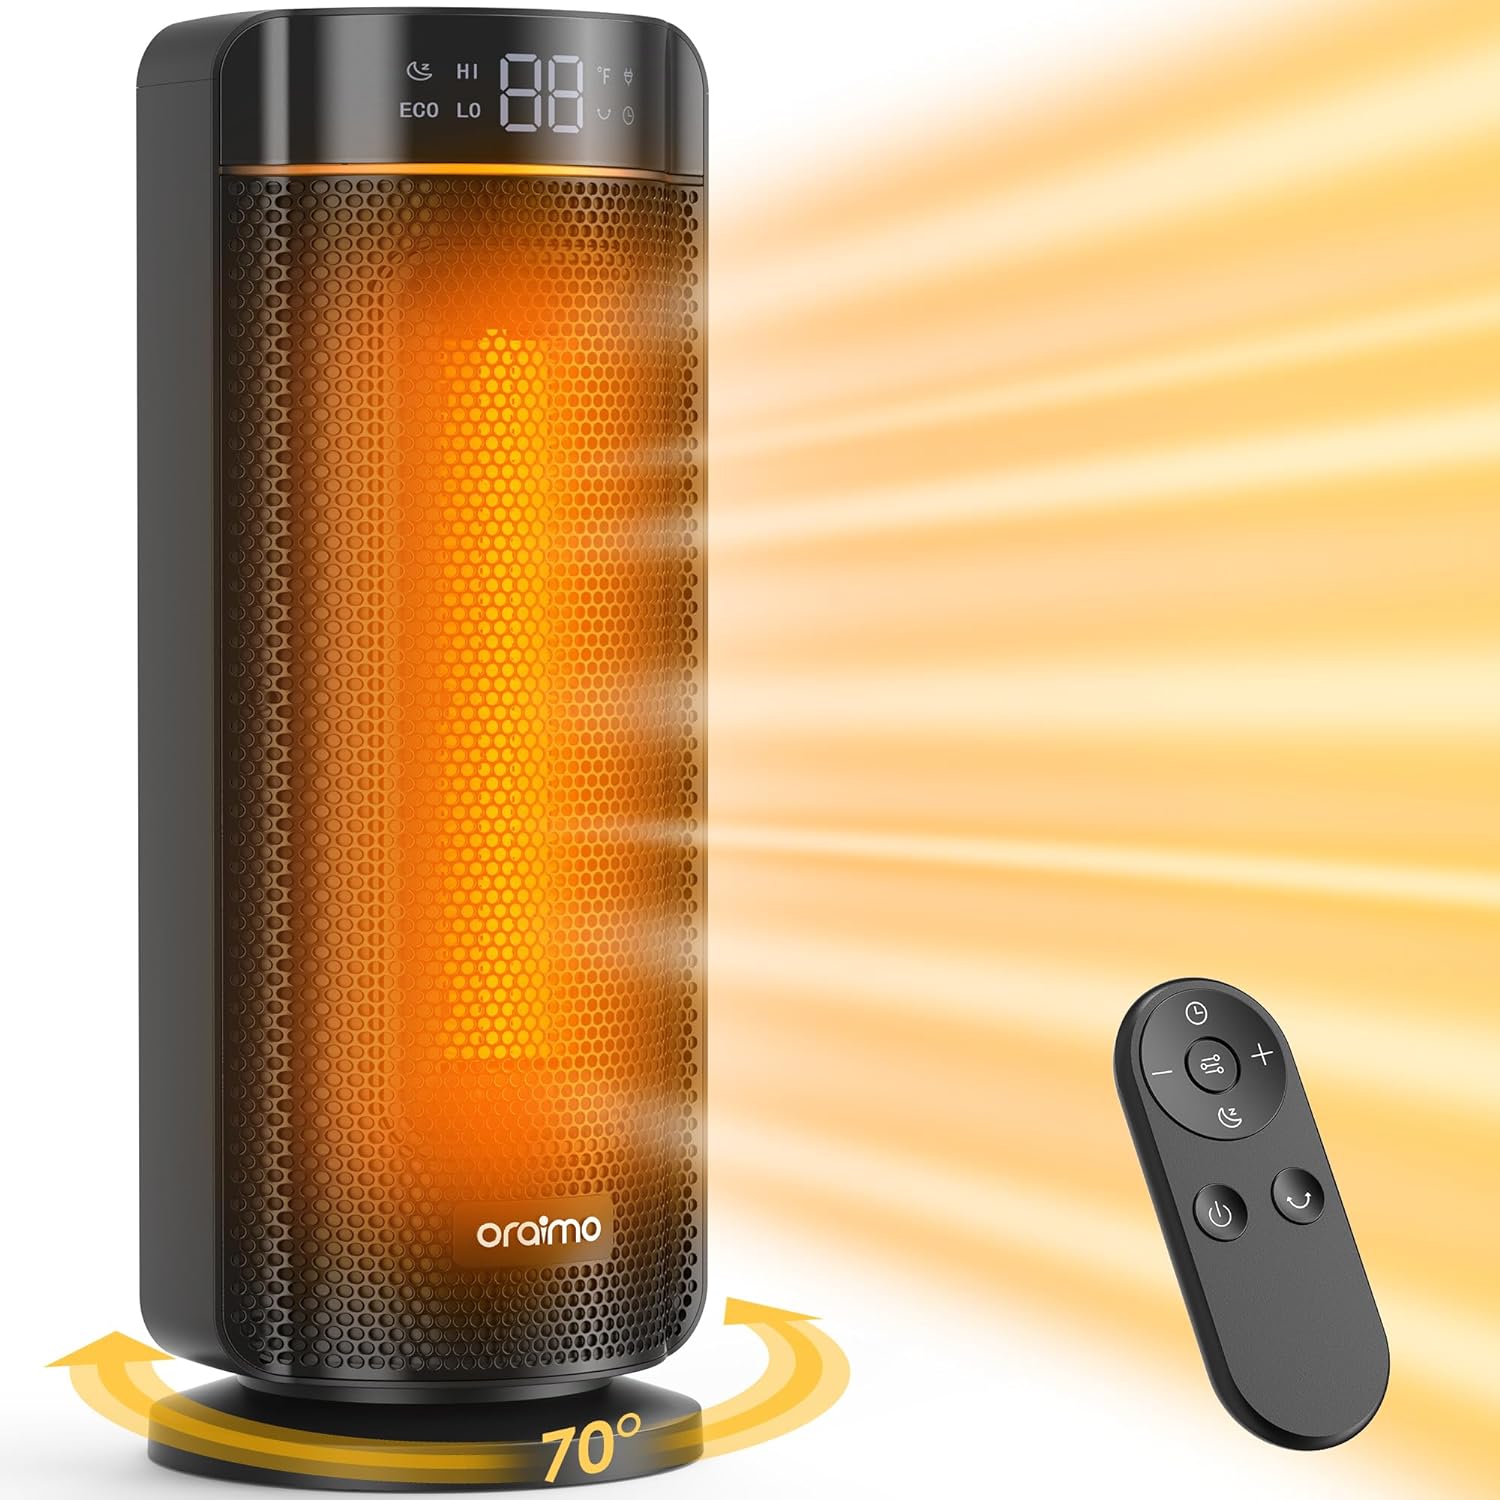 Hot Savings Alert: Oraimo Space Heater, 1500W Portable 16" Electric Heaters for Indoor Use - 40% Off!